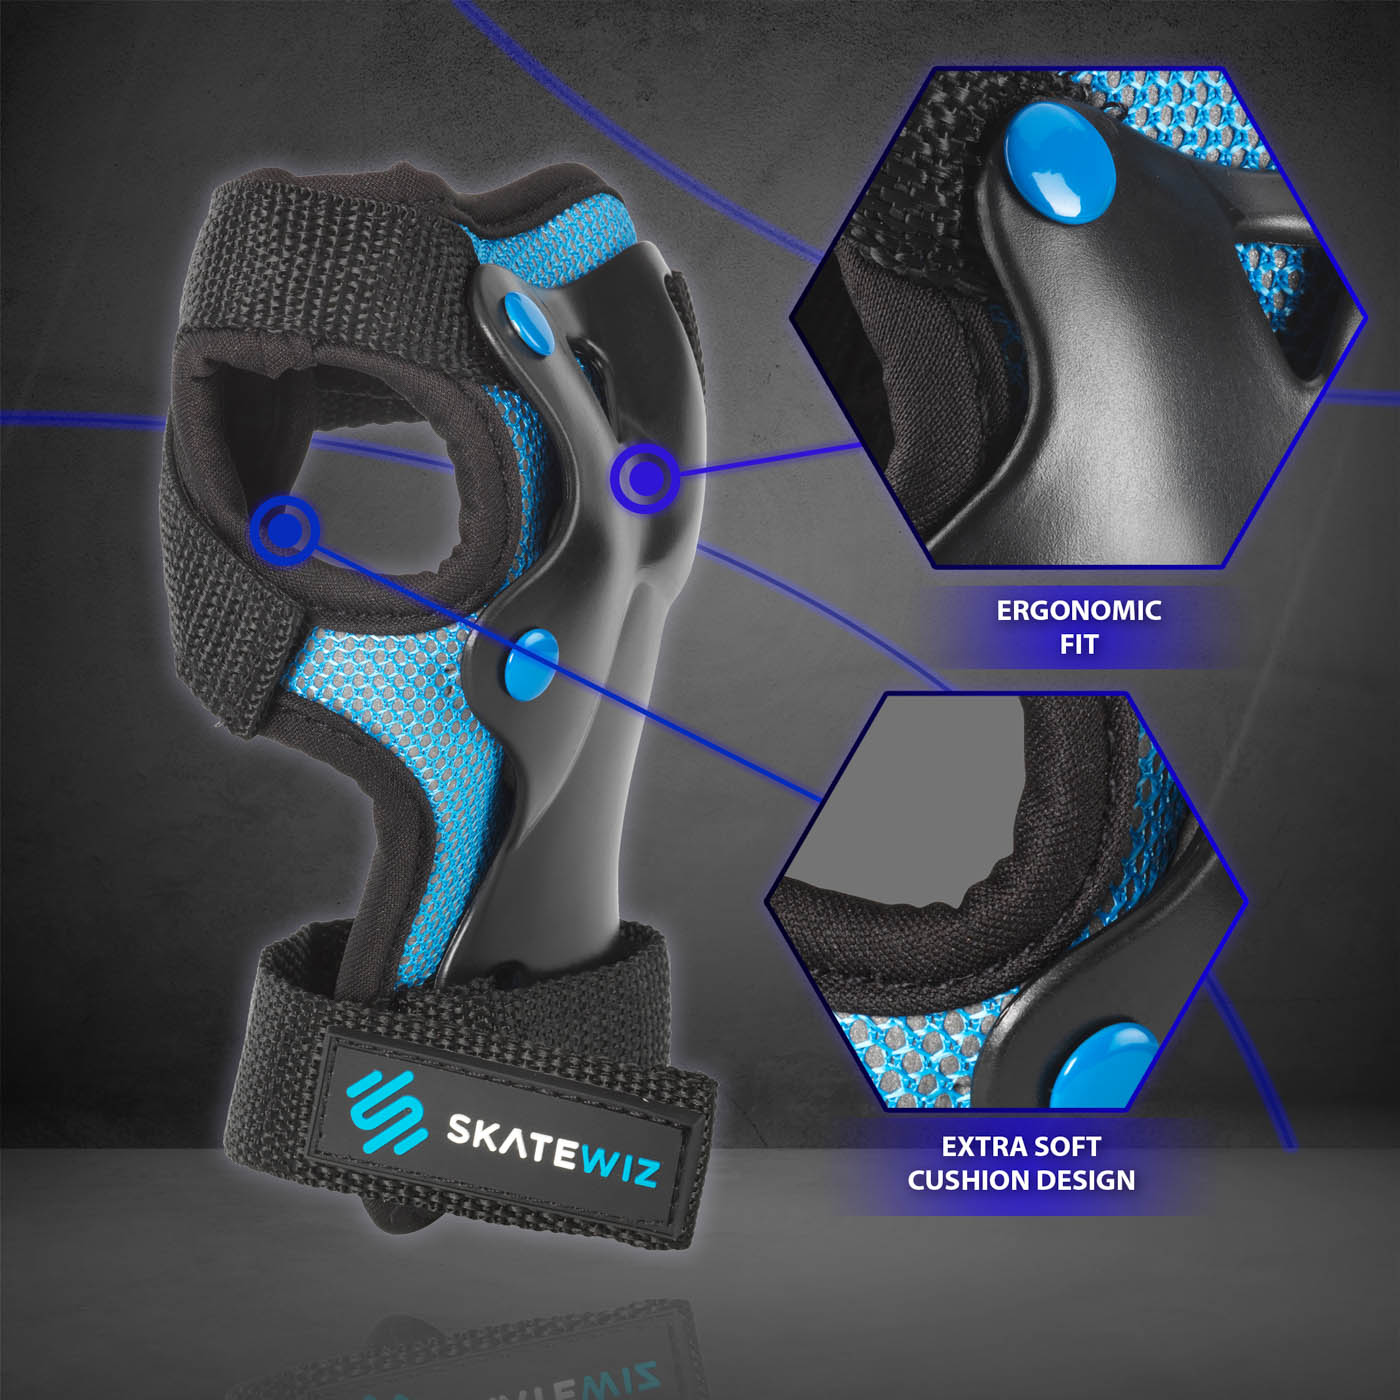 Compare prices for SKATEWIZ across all European  stores